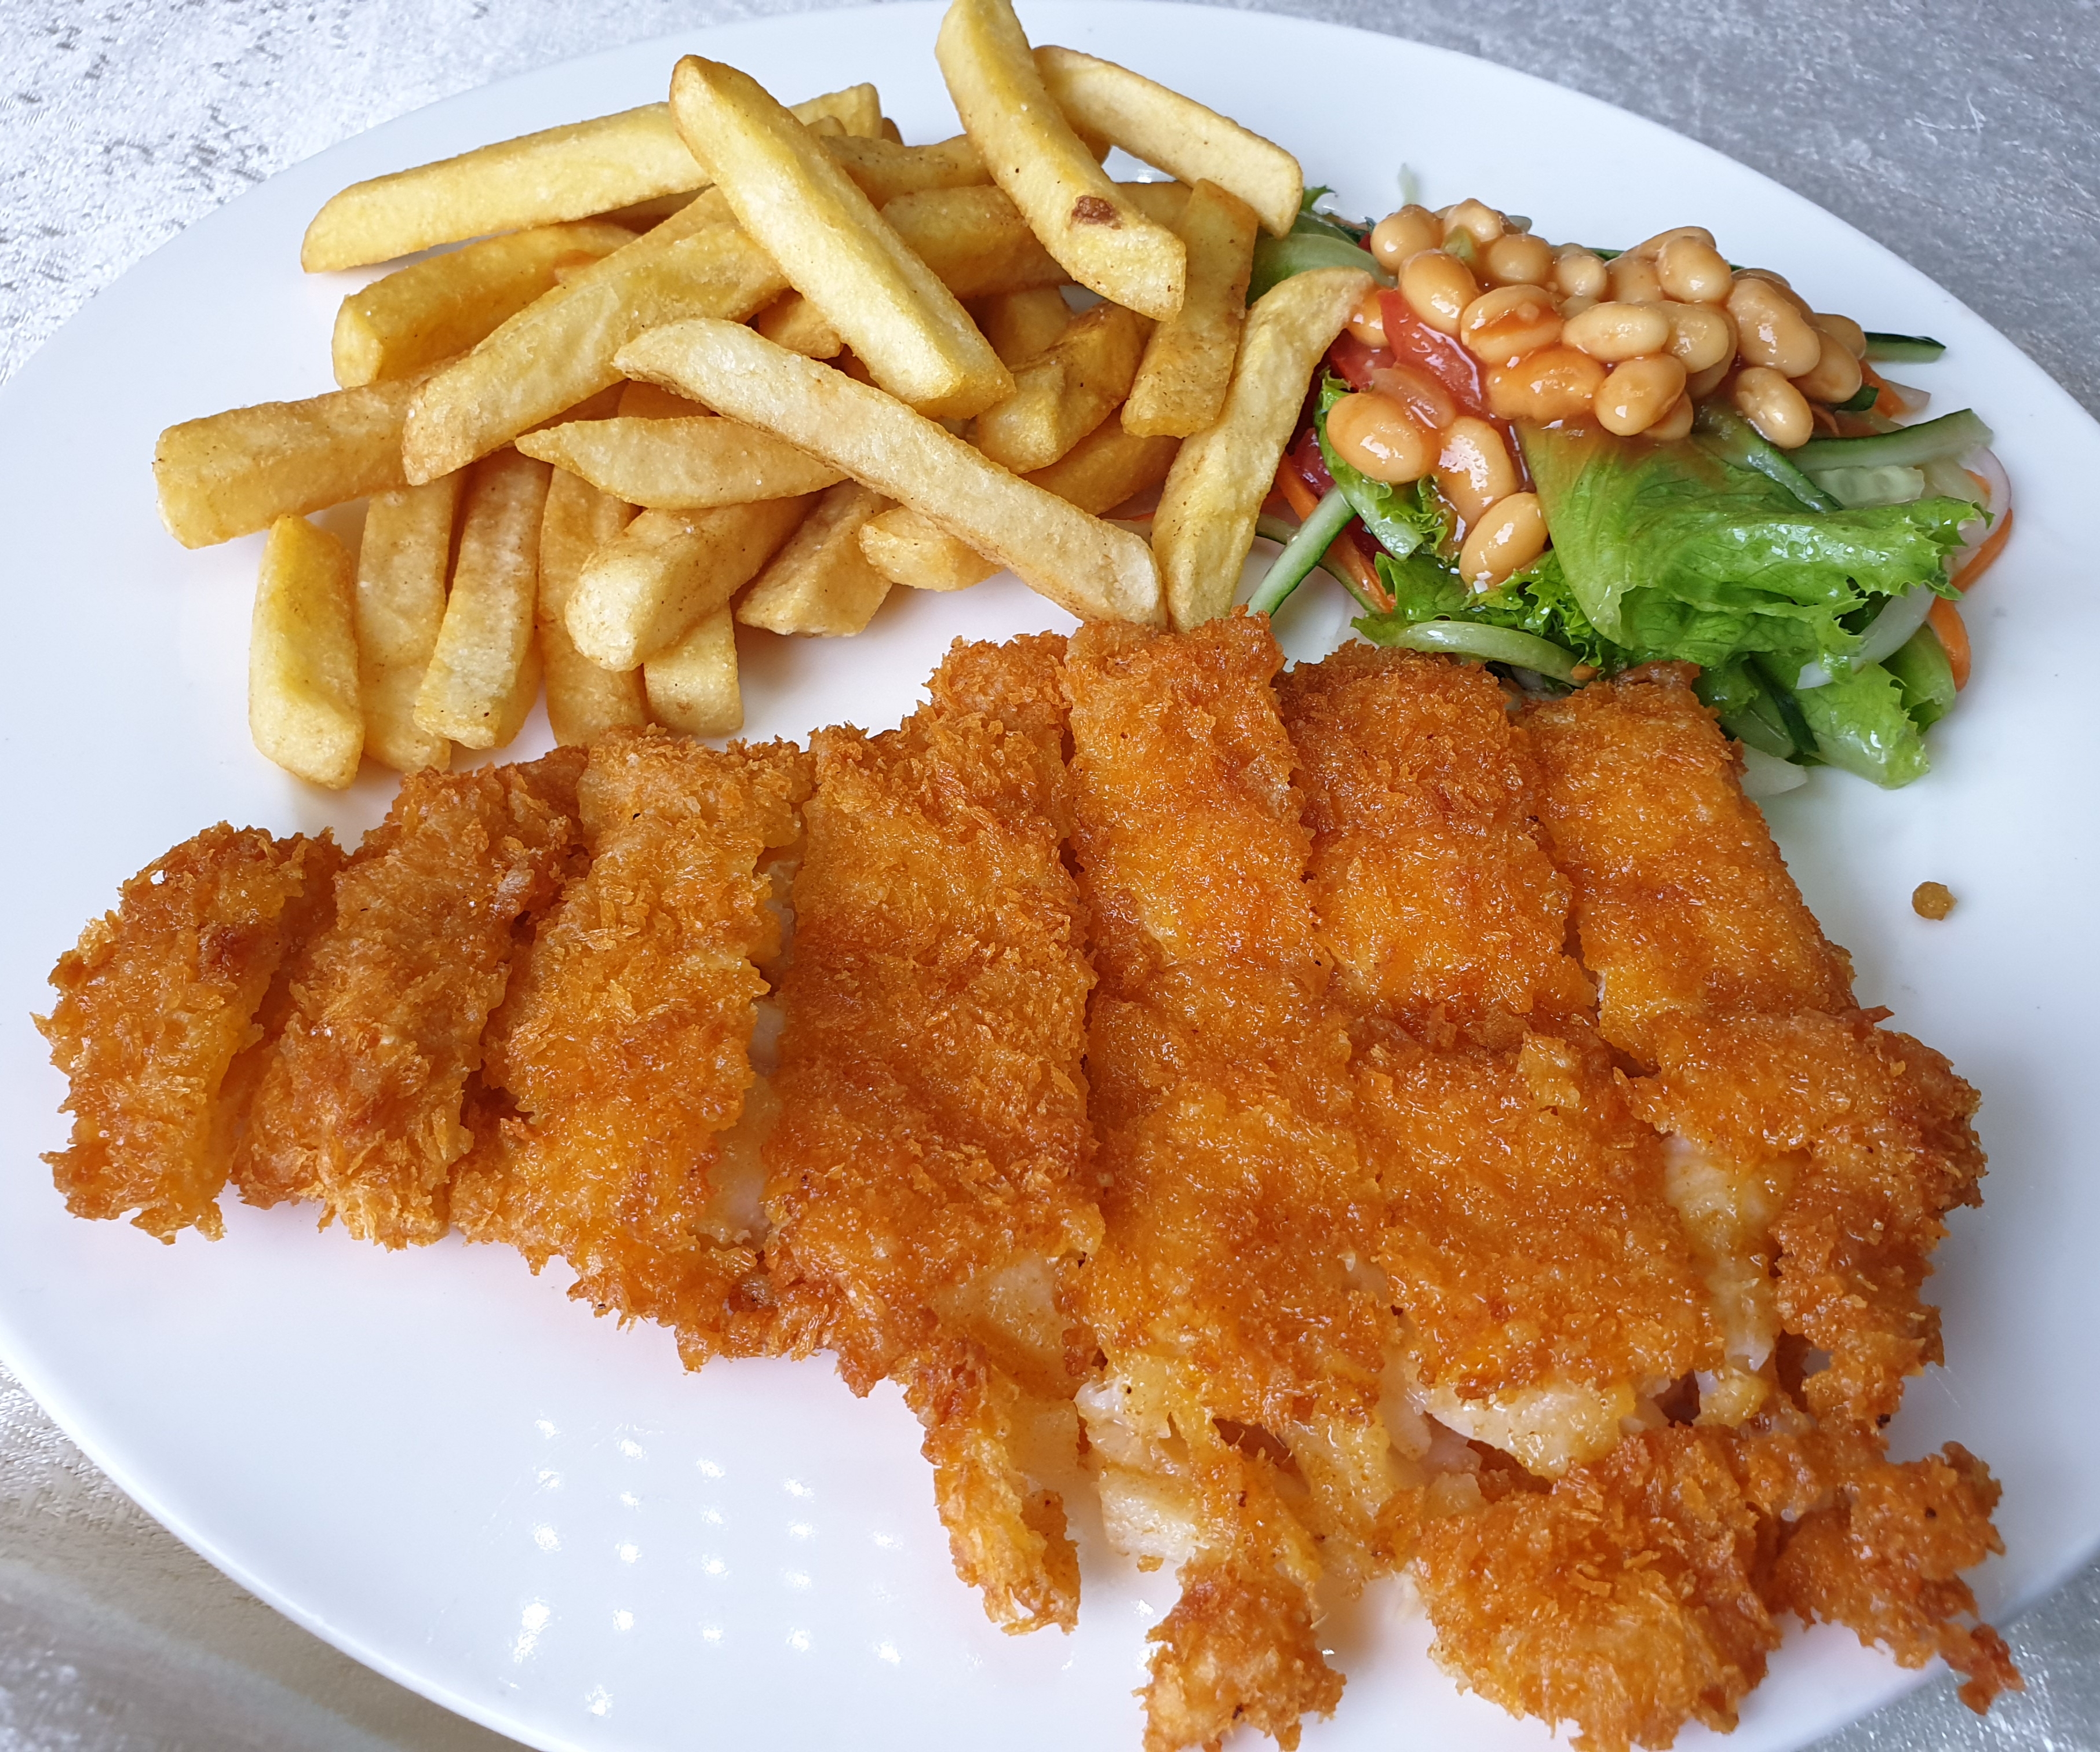 Fried fish fillet and chips